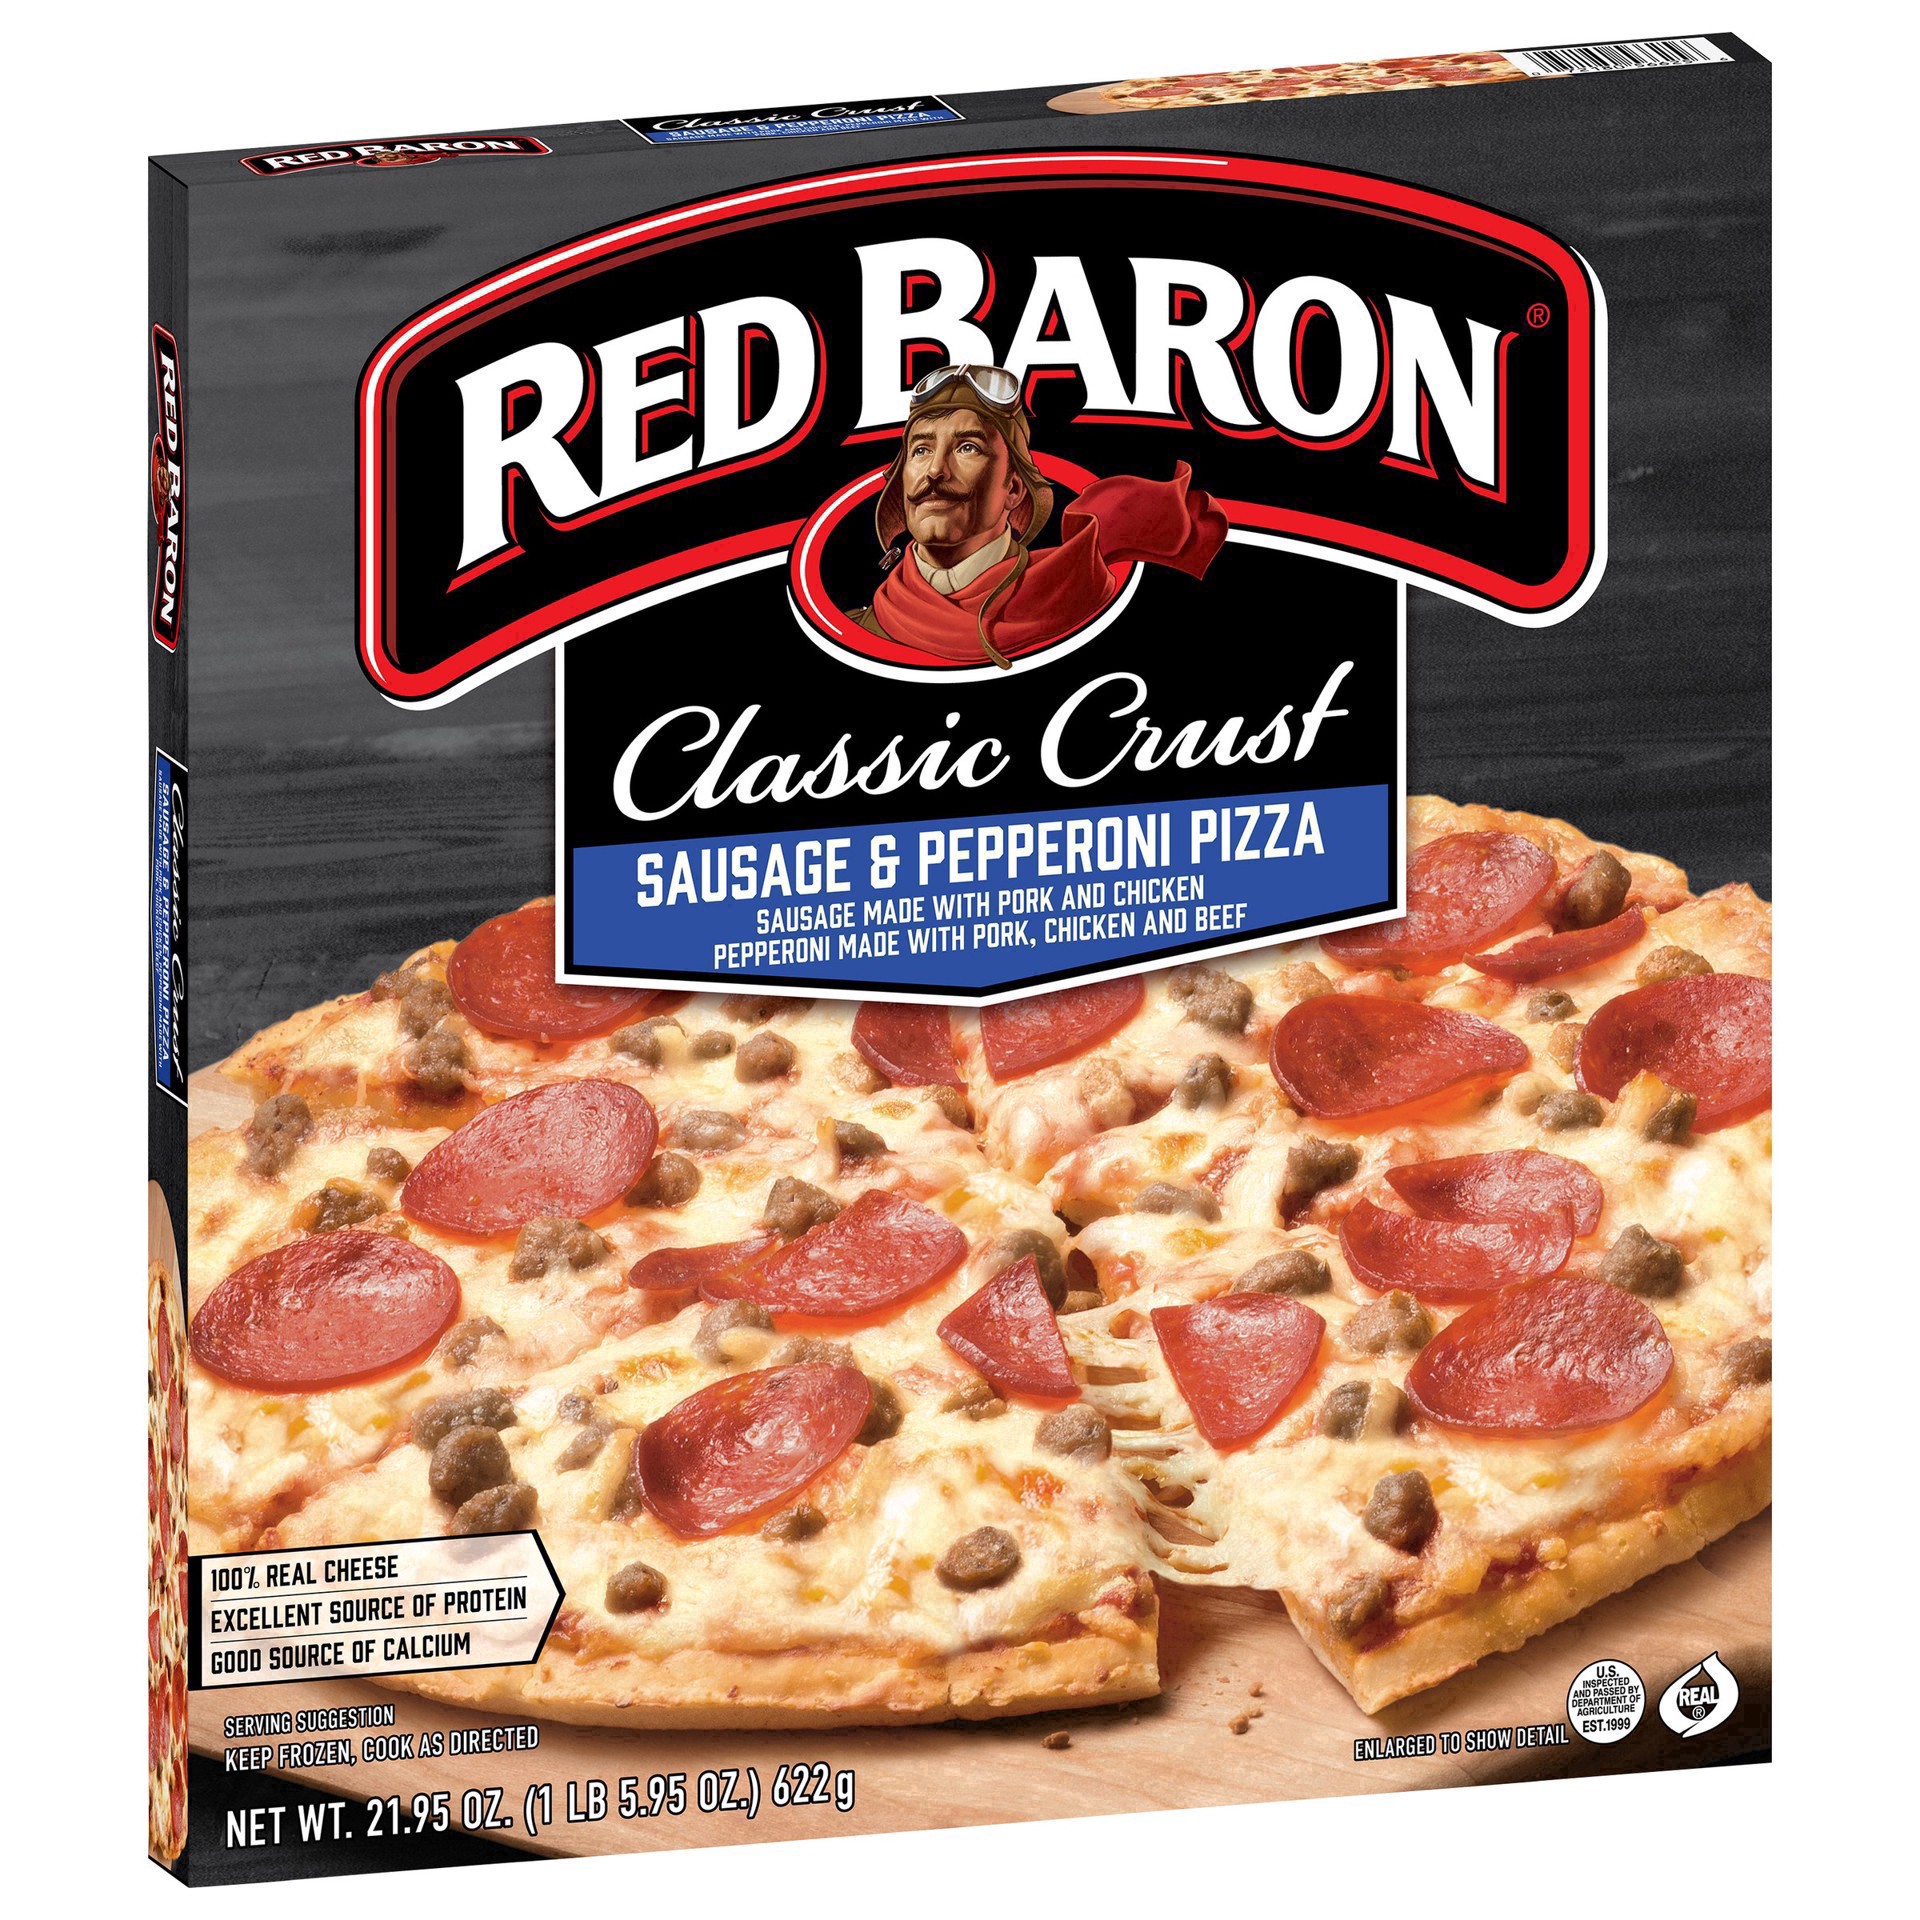 slide 26 of 49, Red Baron Frozen Pizza Classic Crust Sausage & Pepperoni, 21.95 oz